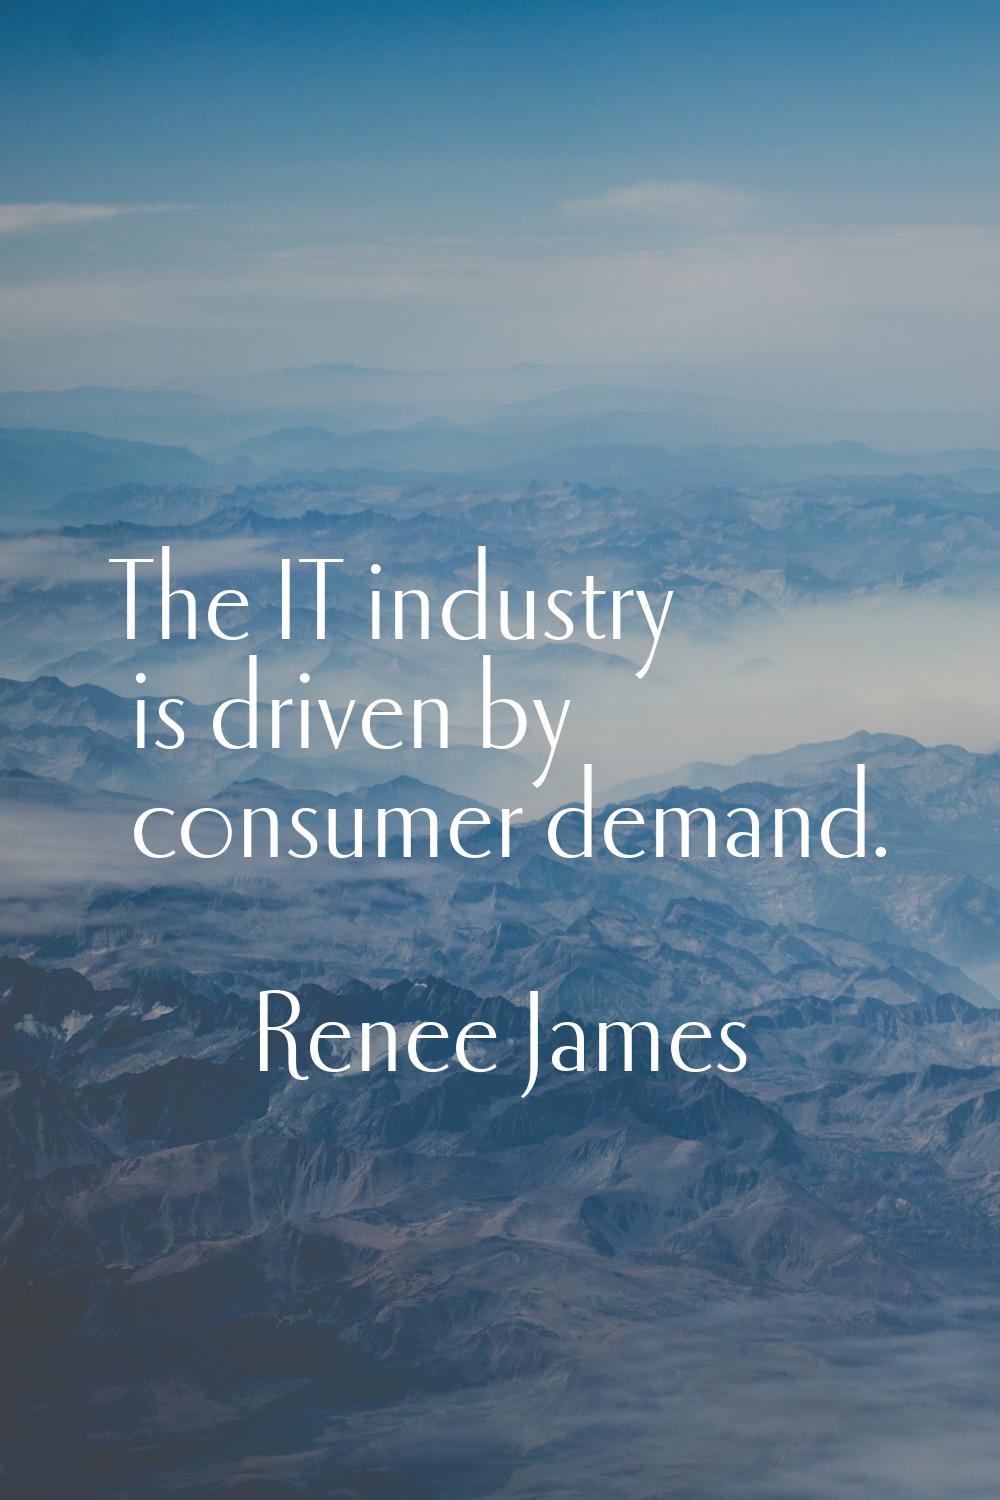 The IT industry is driven by consumer demand.